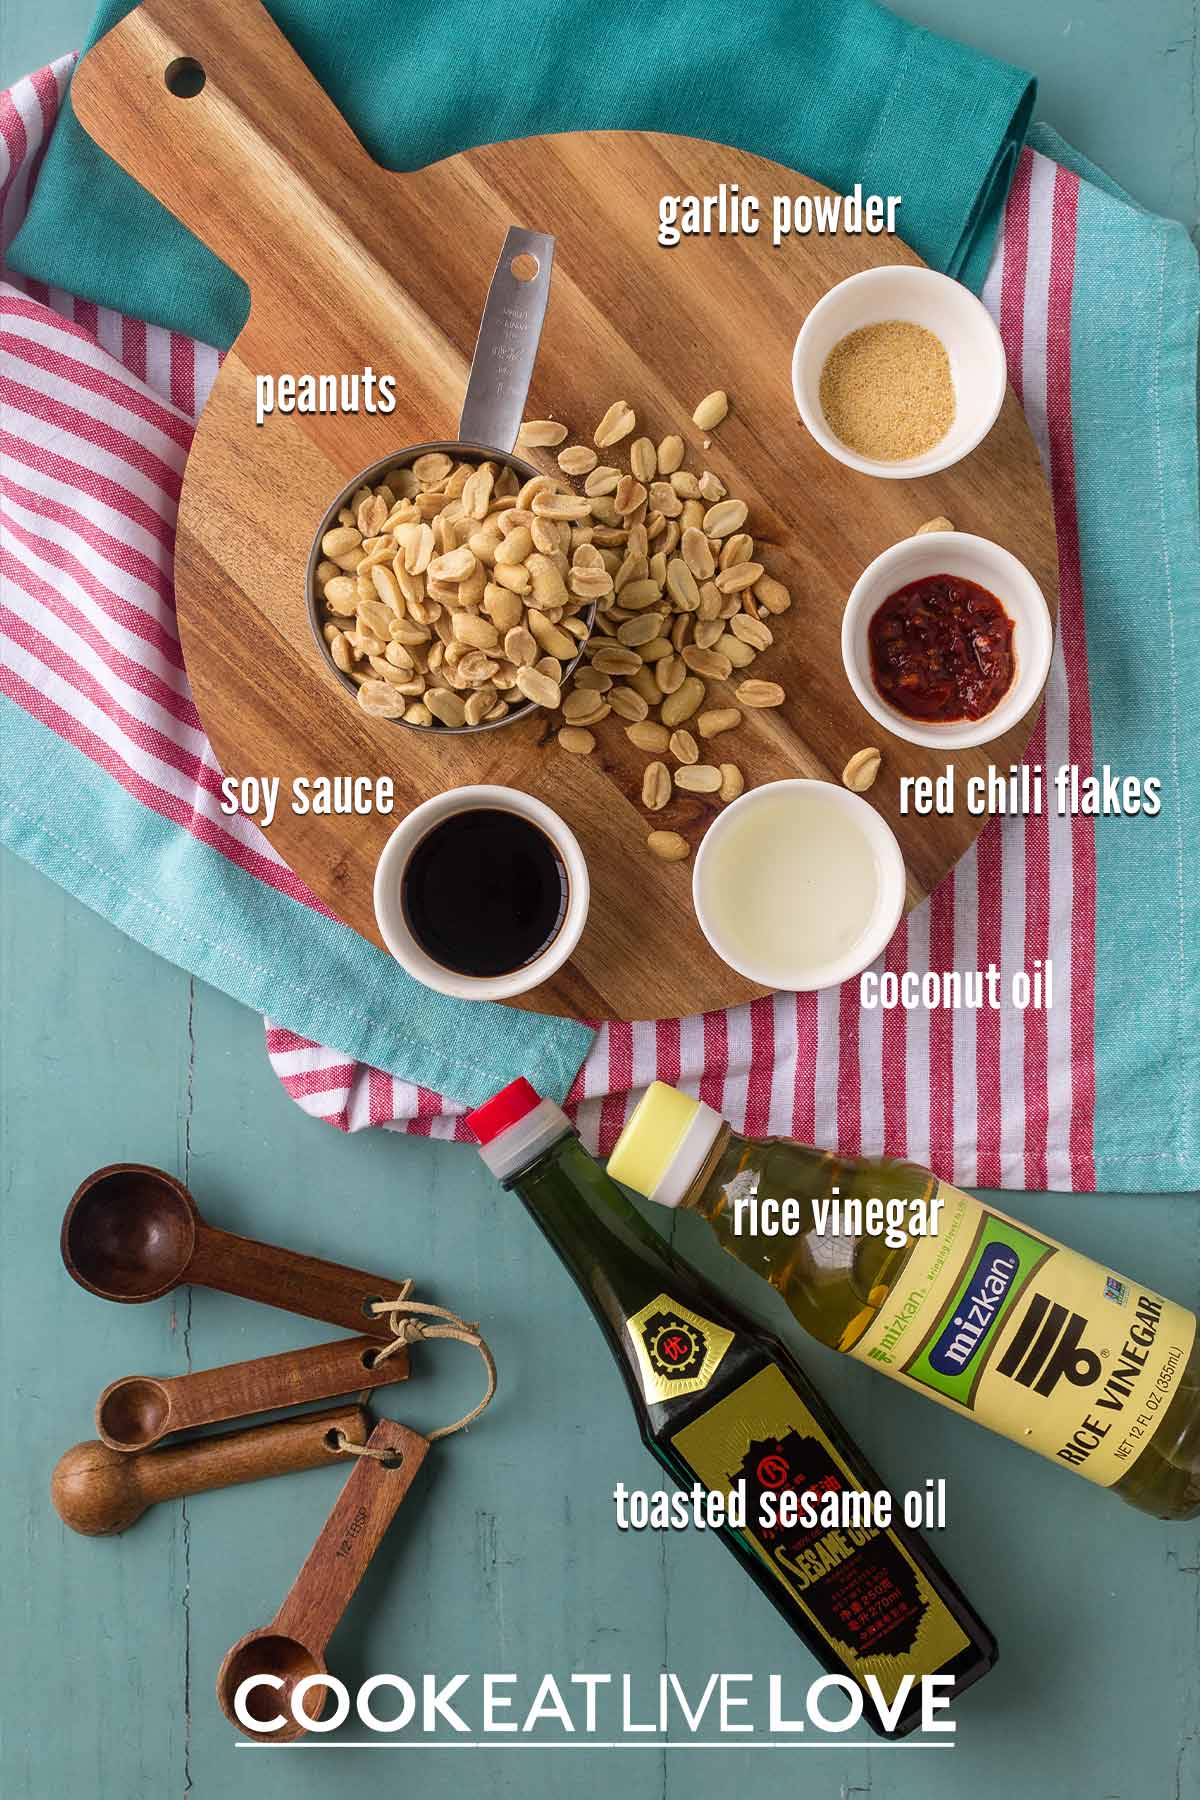 Ingredients to make 5 ingredient peanut sauce on the counter.